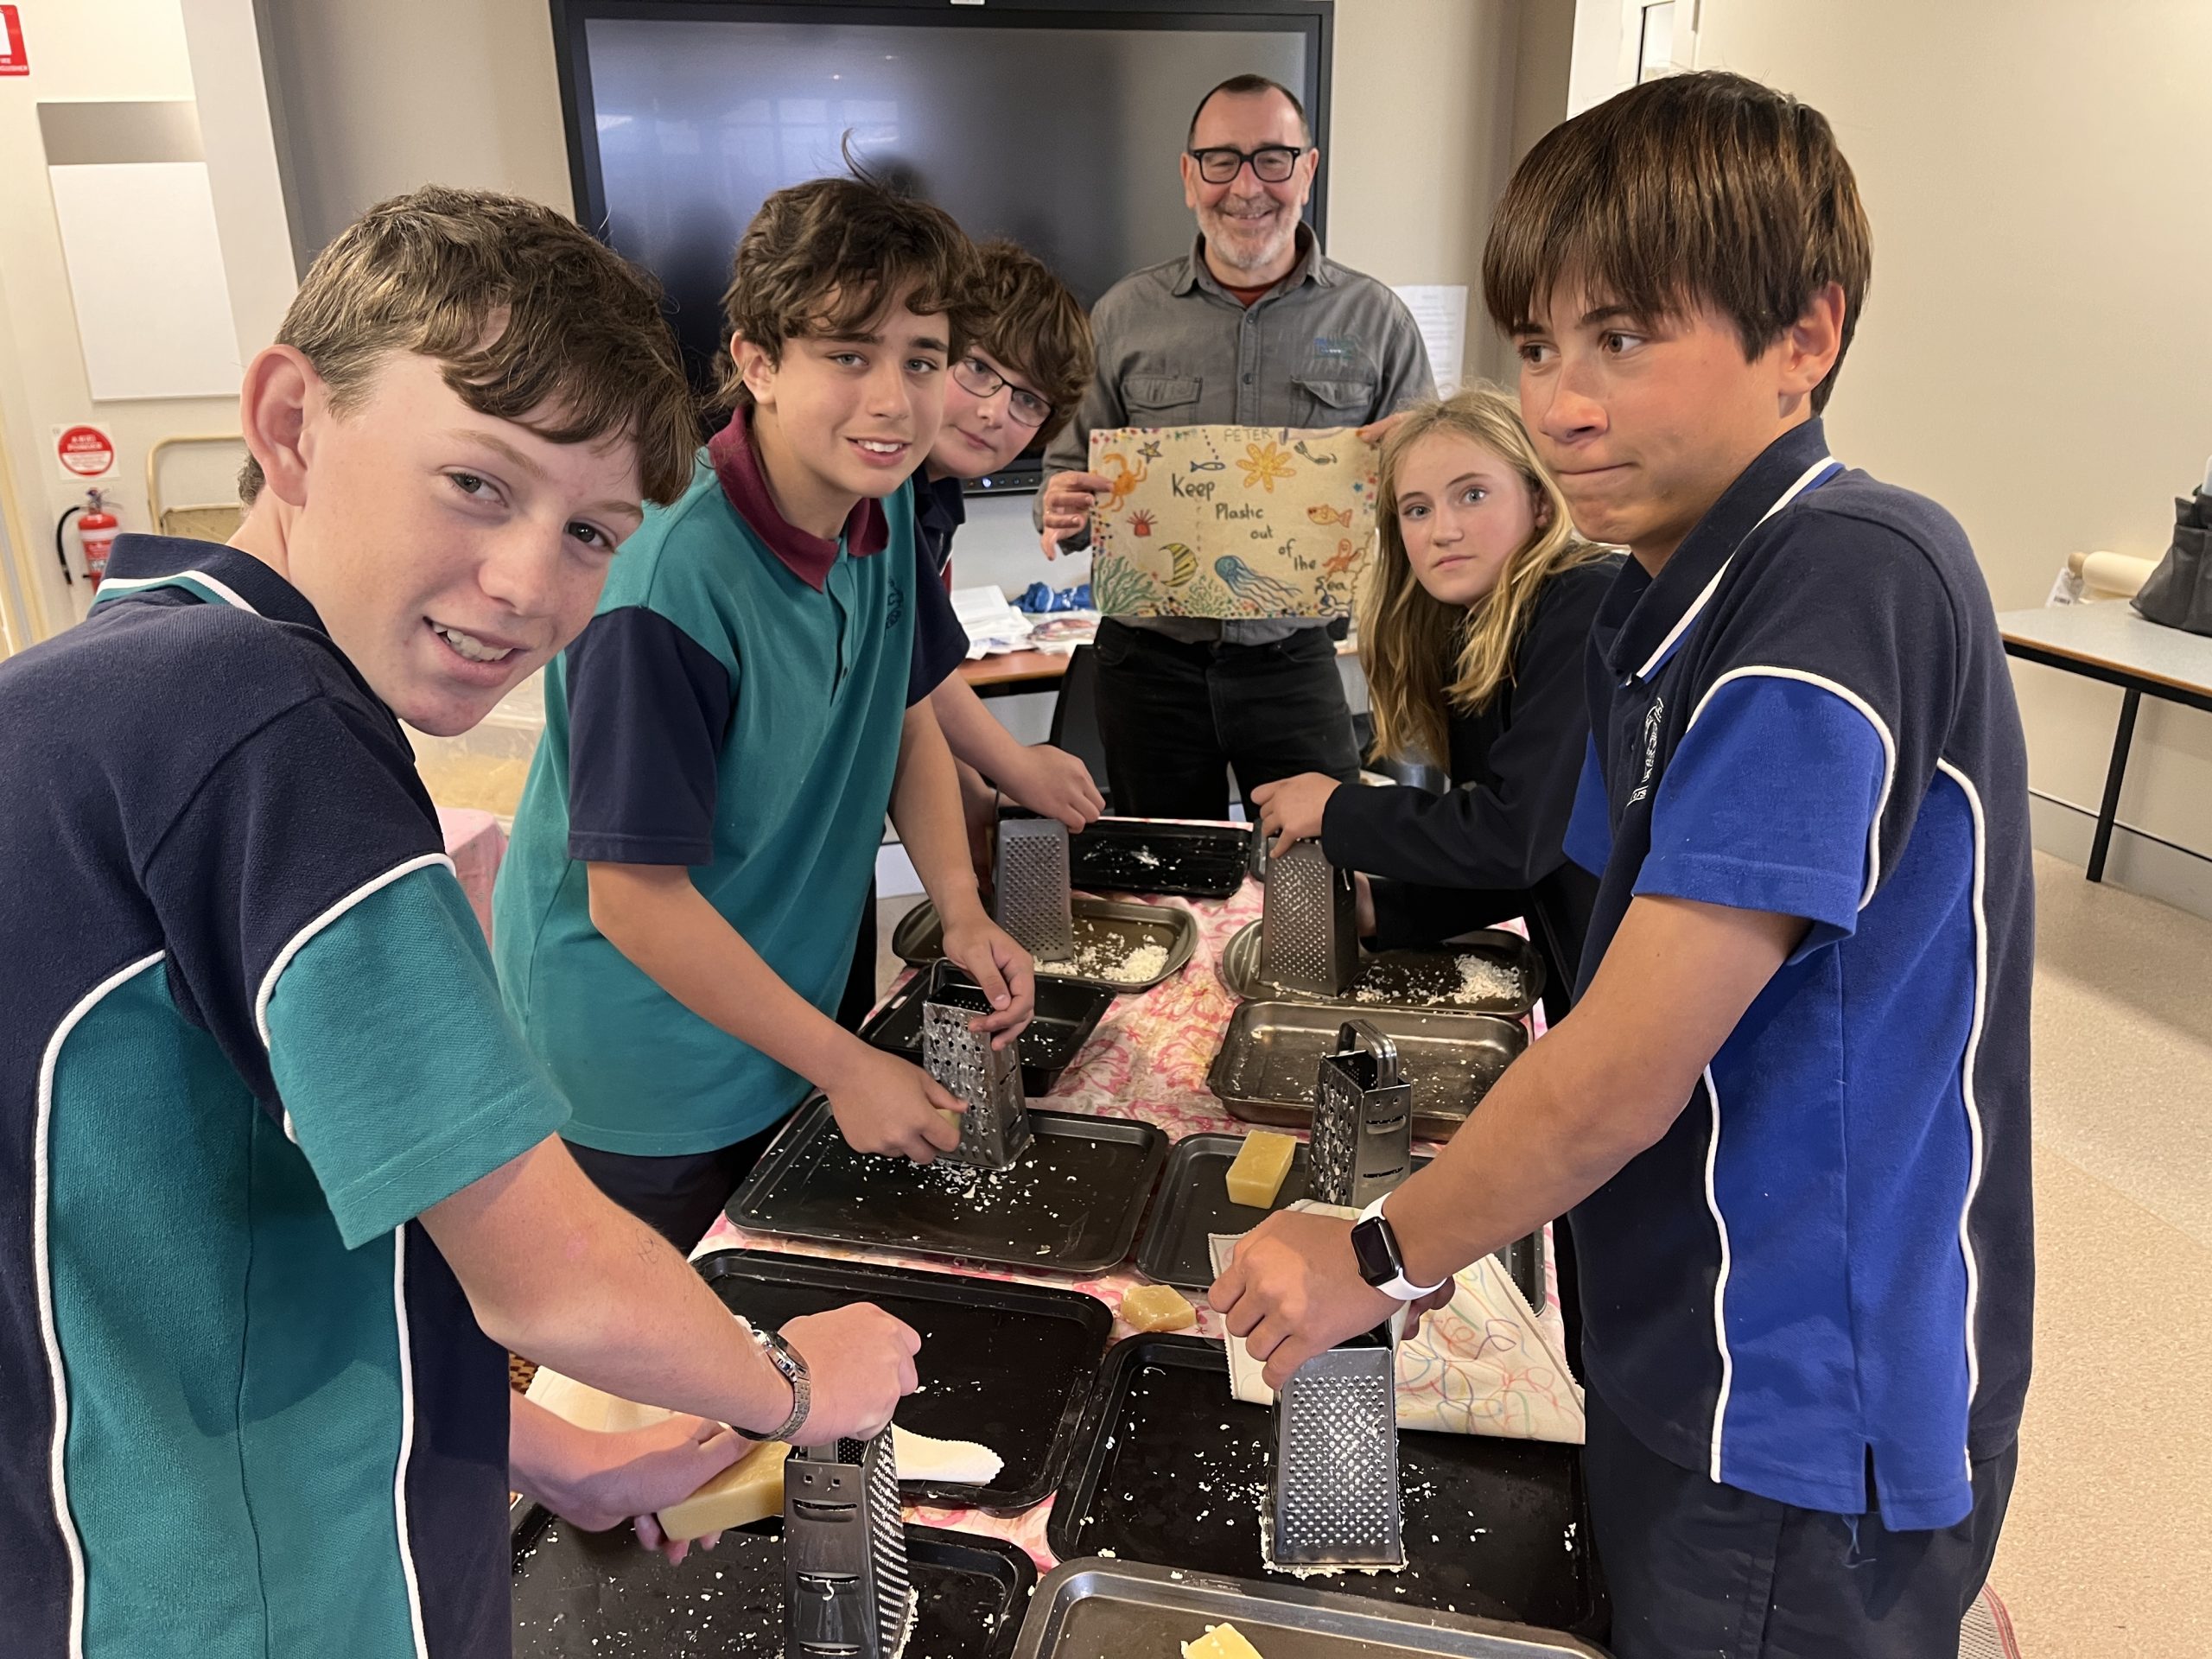 Year 8 making beeswax wraps under the guidance of experts from North East Waste